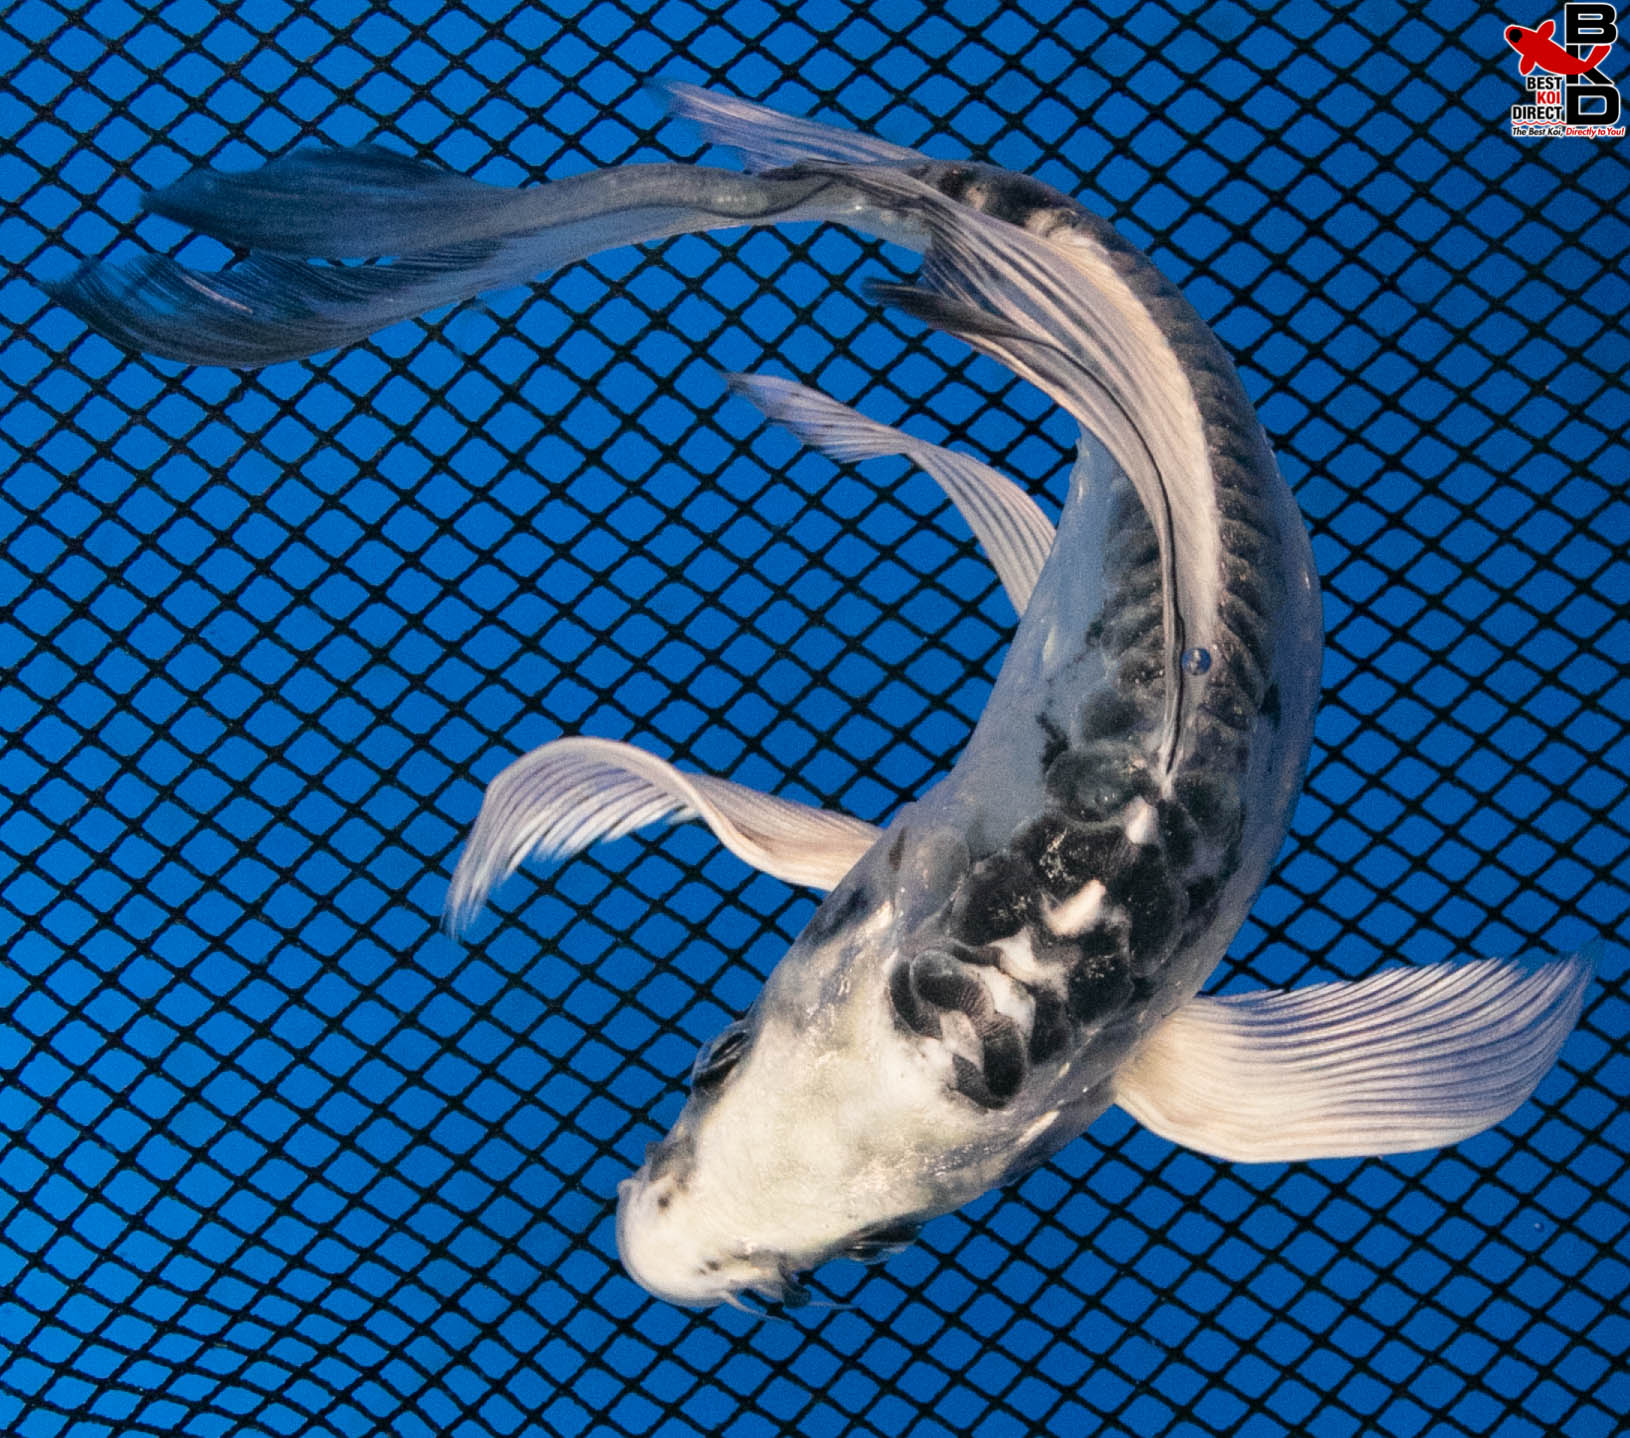 5" BUTTERFLY GHOST - Best Koi Direct